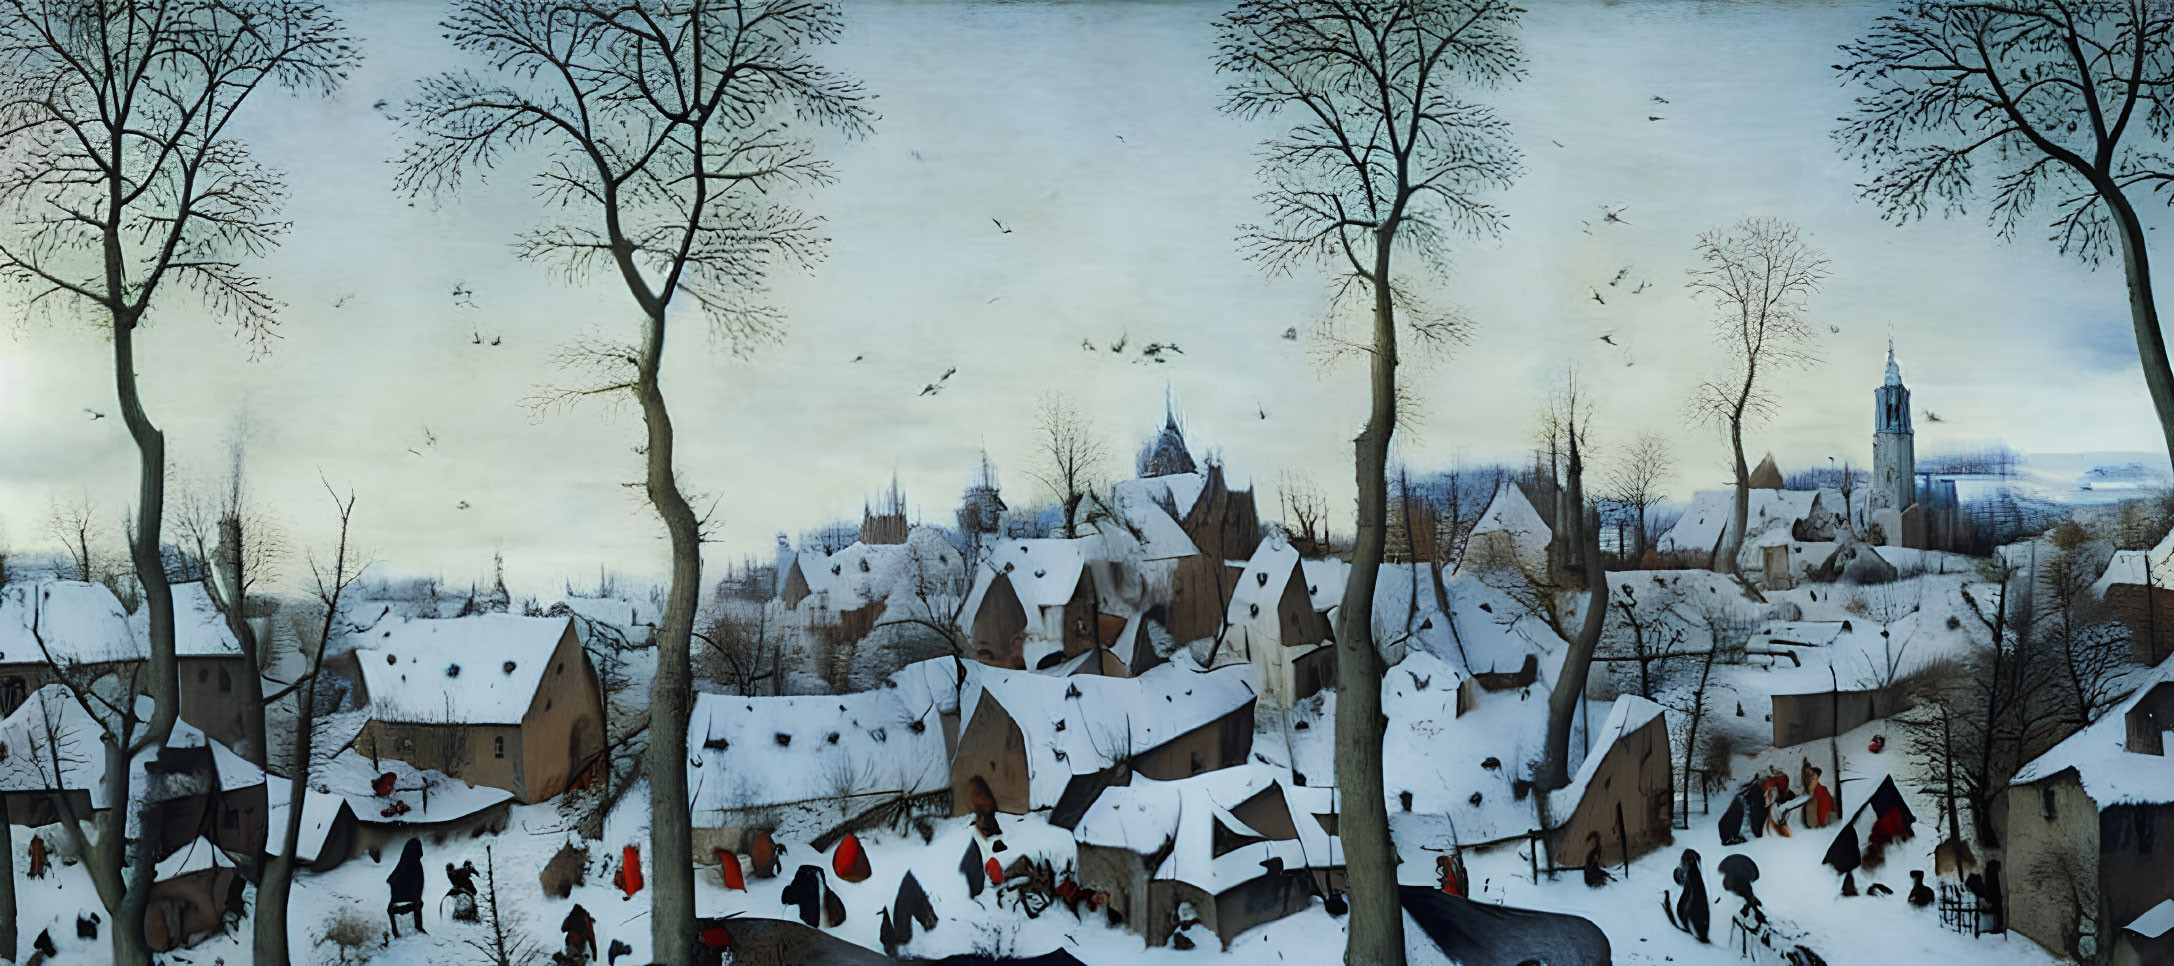 Snow-covered village and leafless trees in panoramic winter landscape.